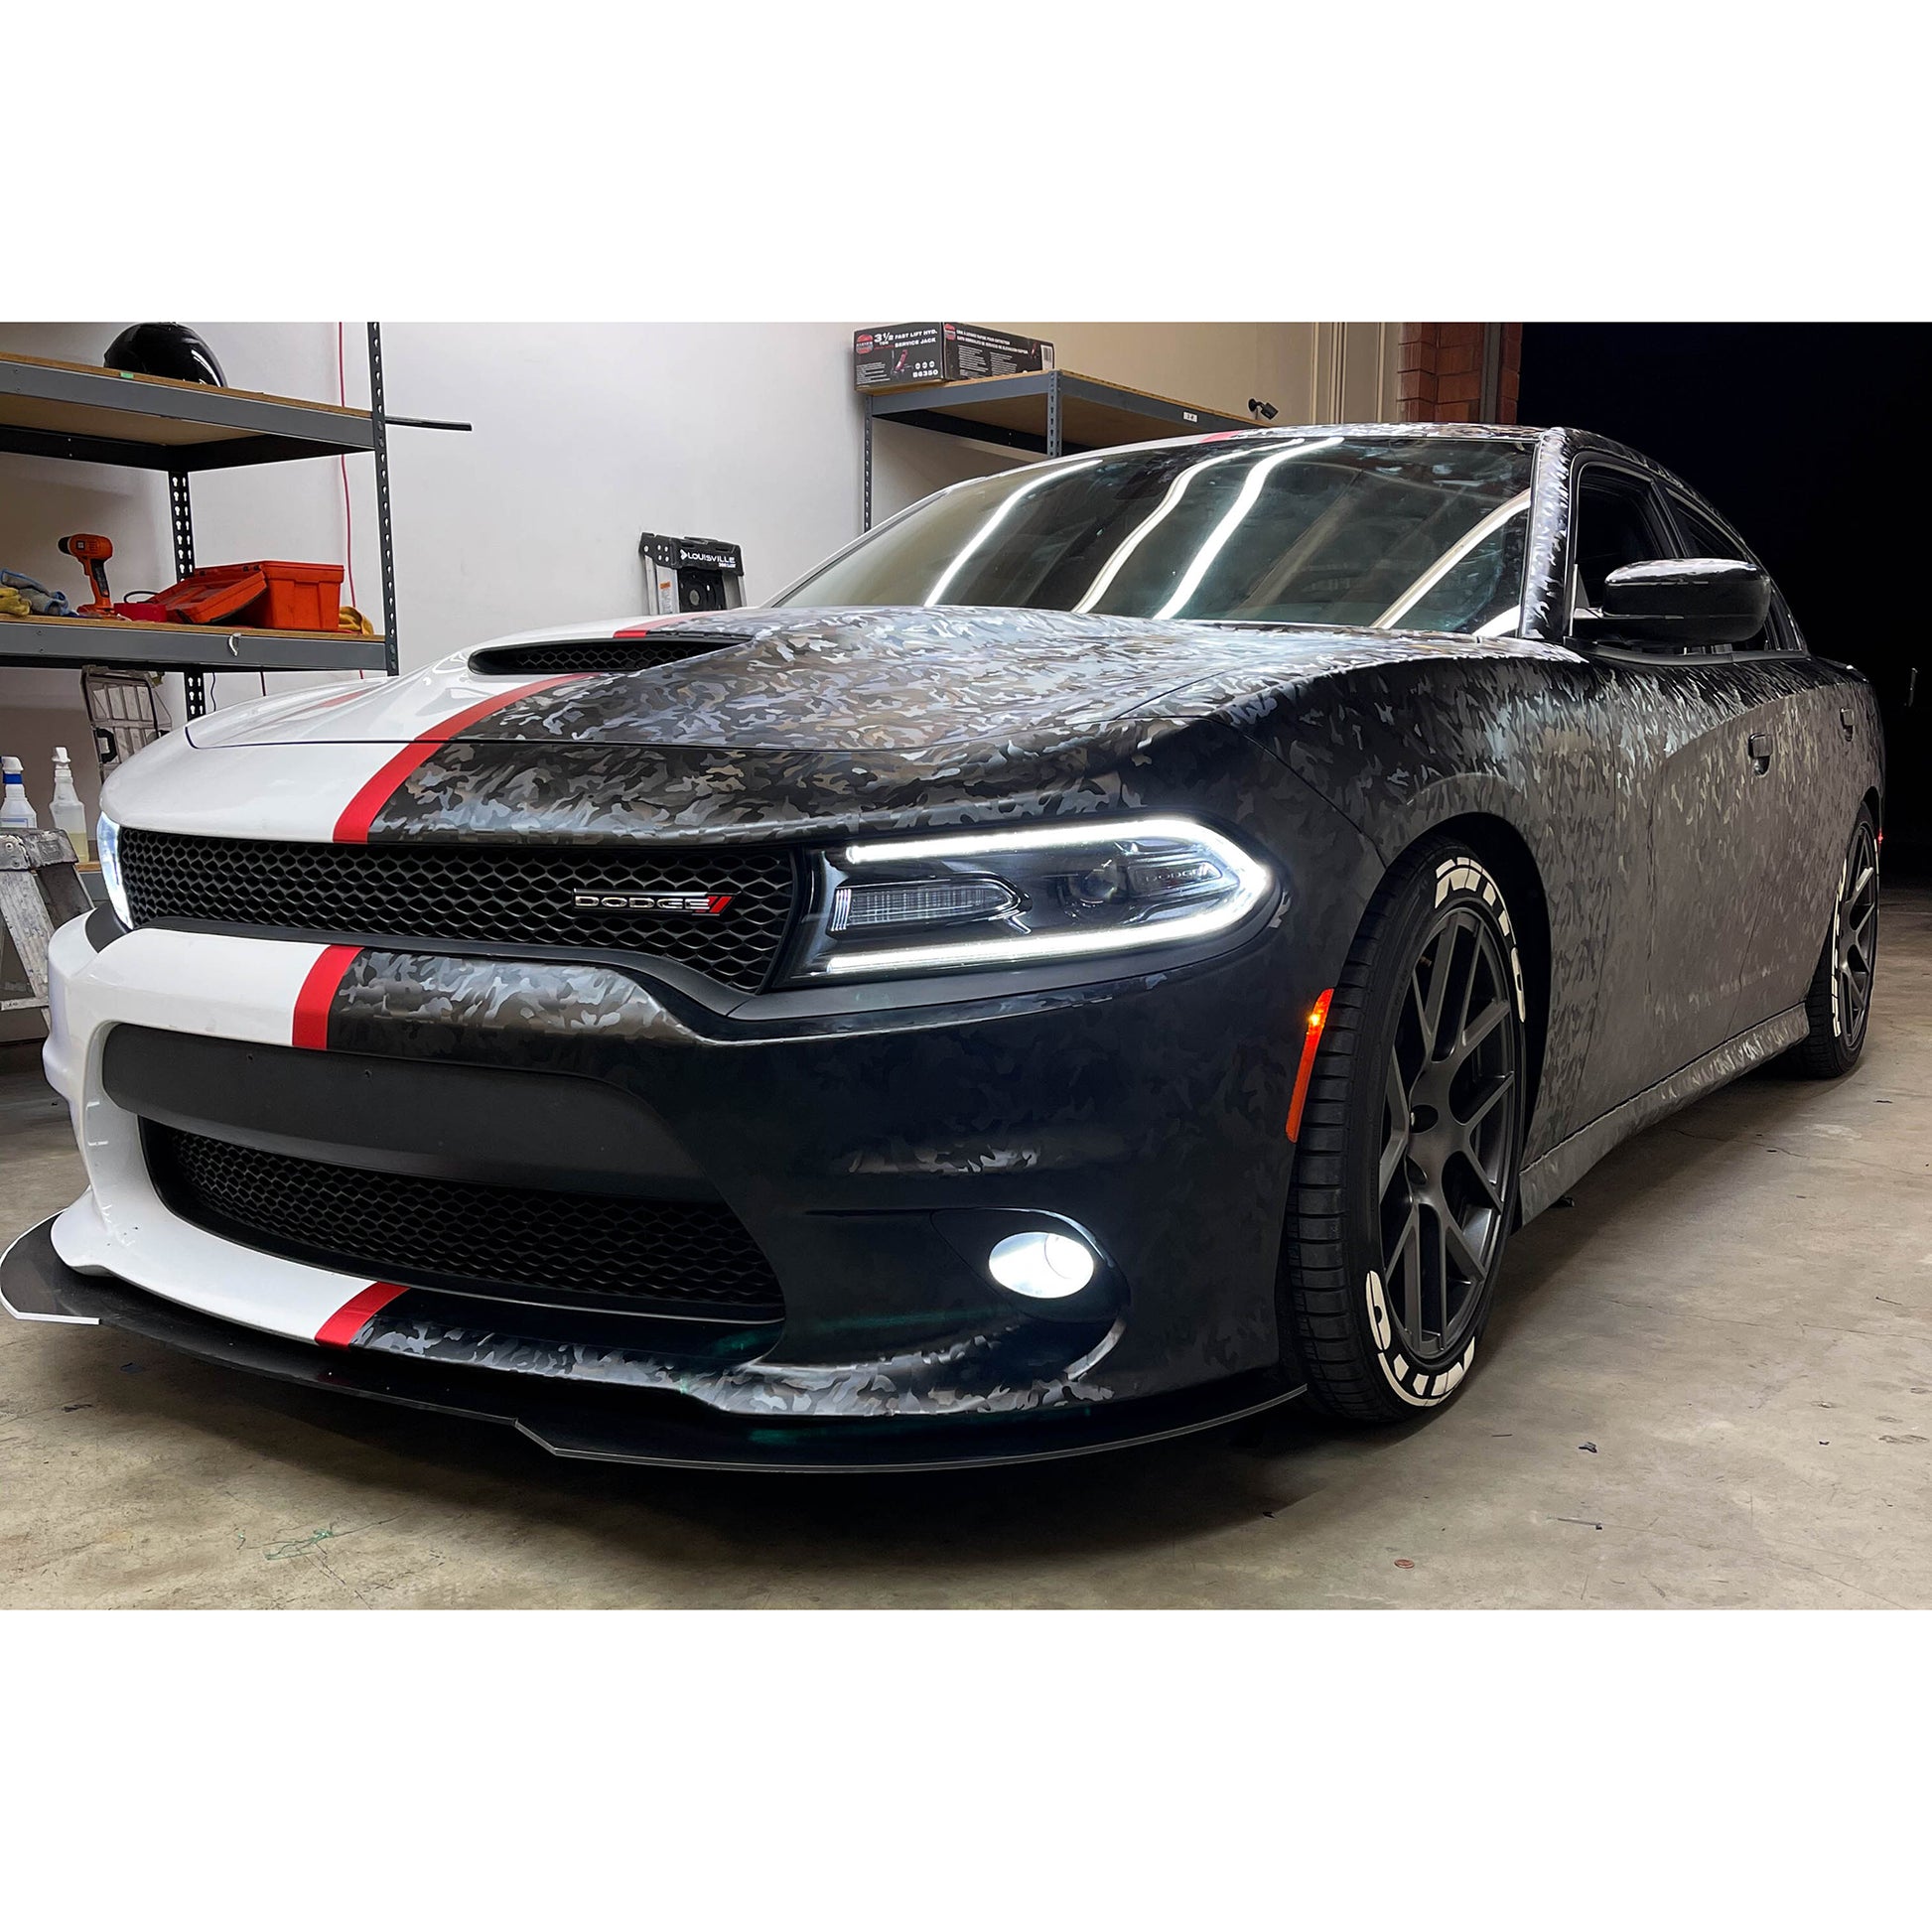 Ceramic Coating: What is it and Should you Apply it Yourself? - Ghost  Shield Film